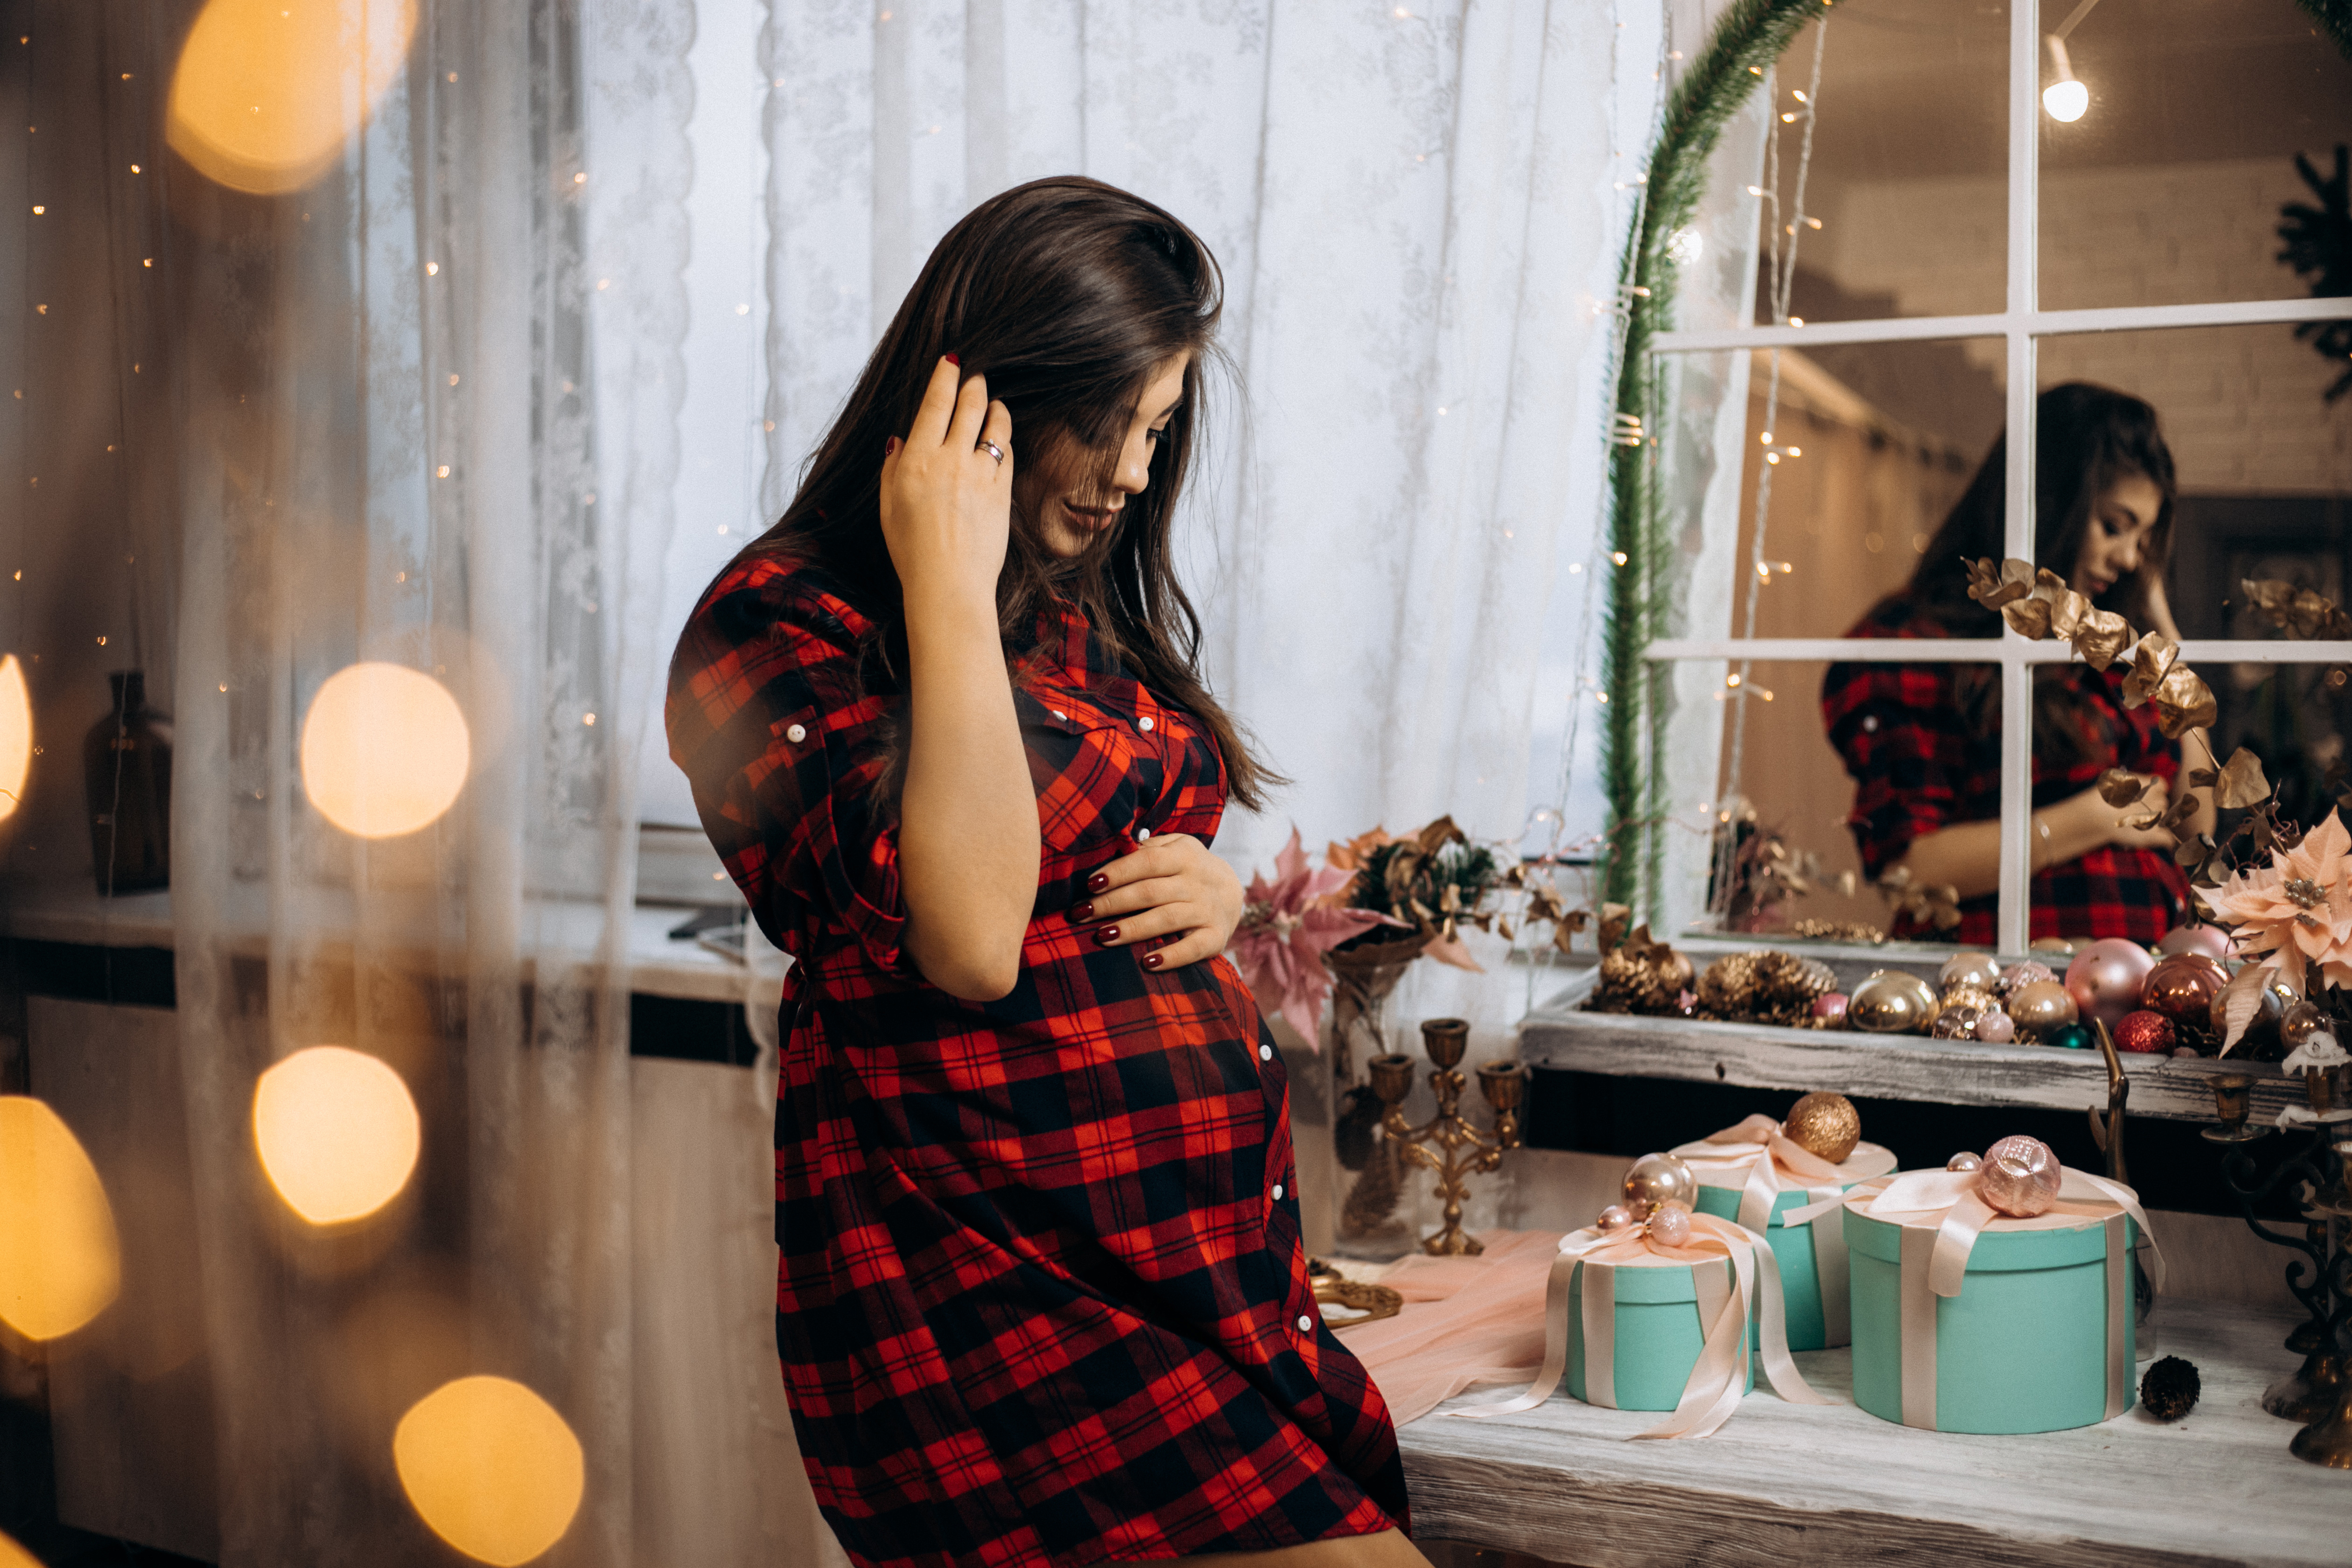 Styling Your Baby Bump: Maternity Outfit Ideas For Special Occasions